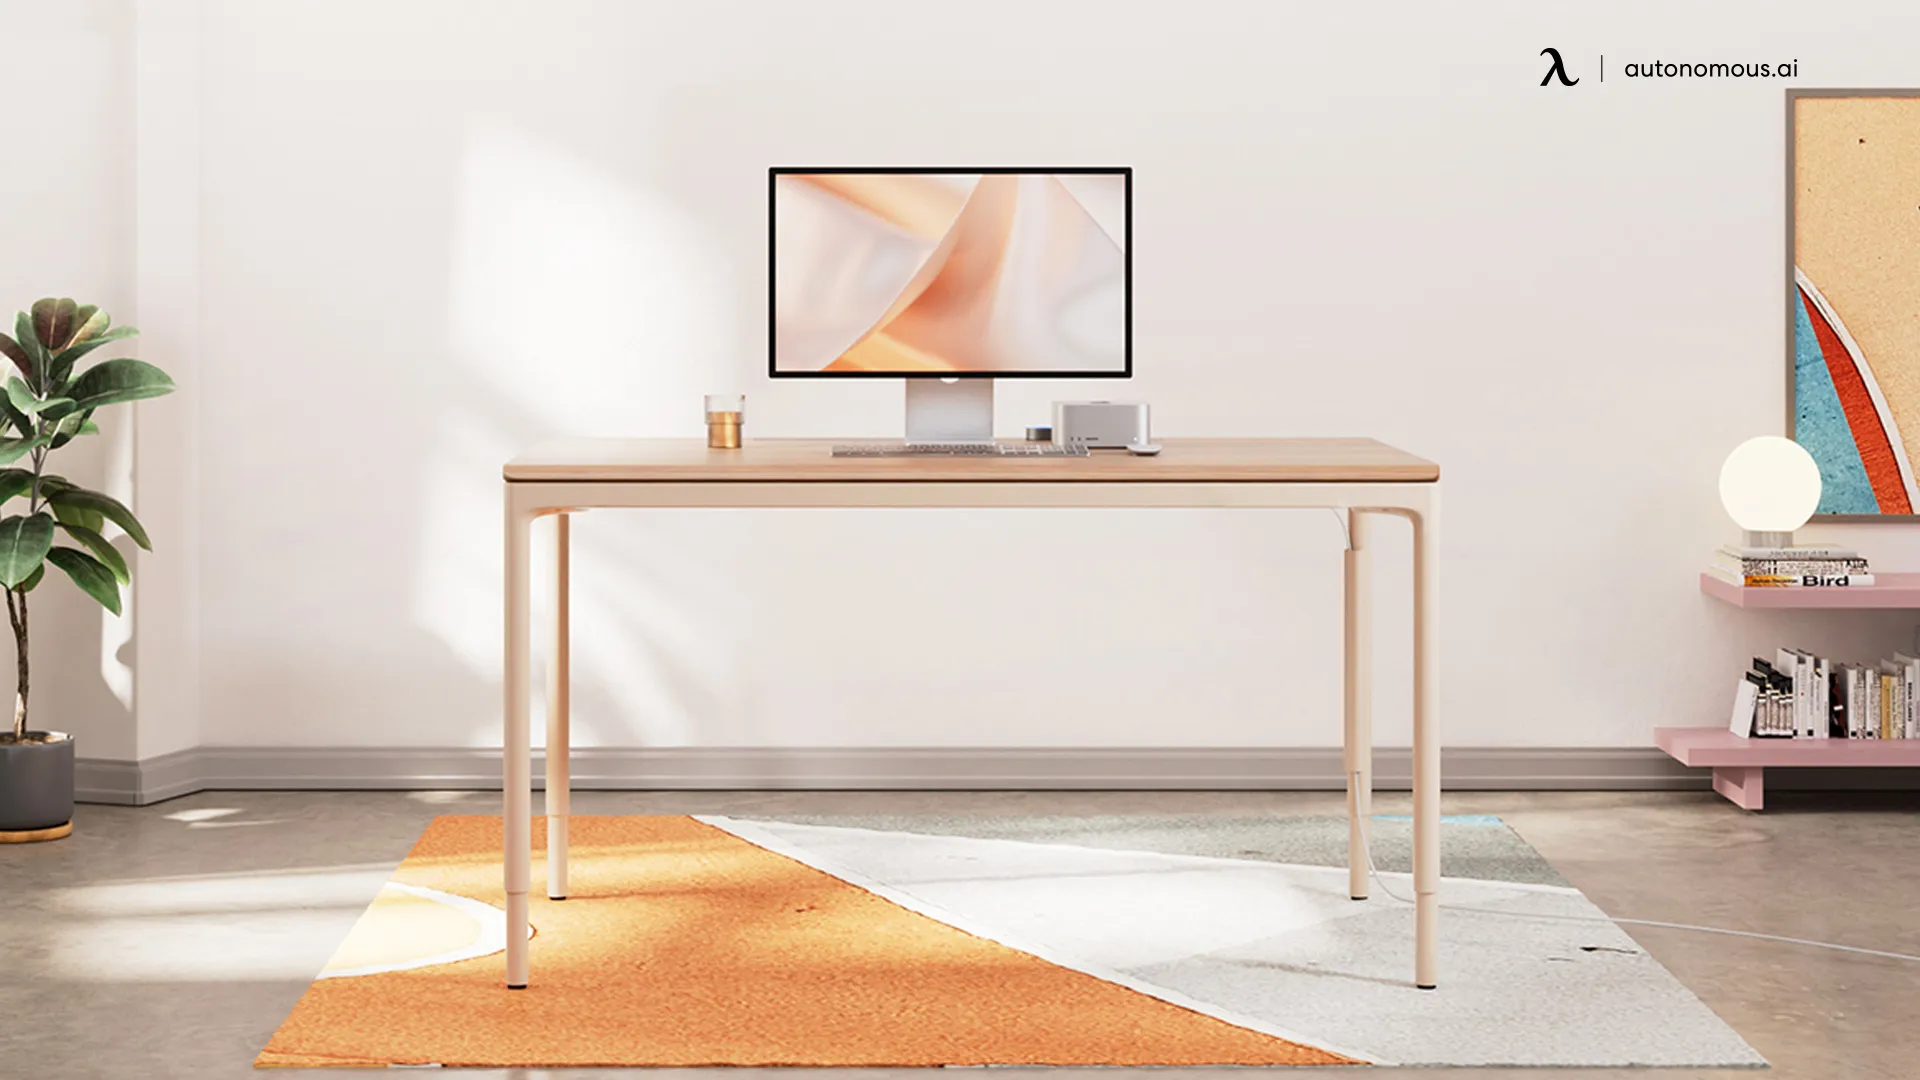 Customize Your Workspace: How to Build Your Own Desk for a Home Office?